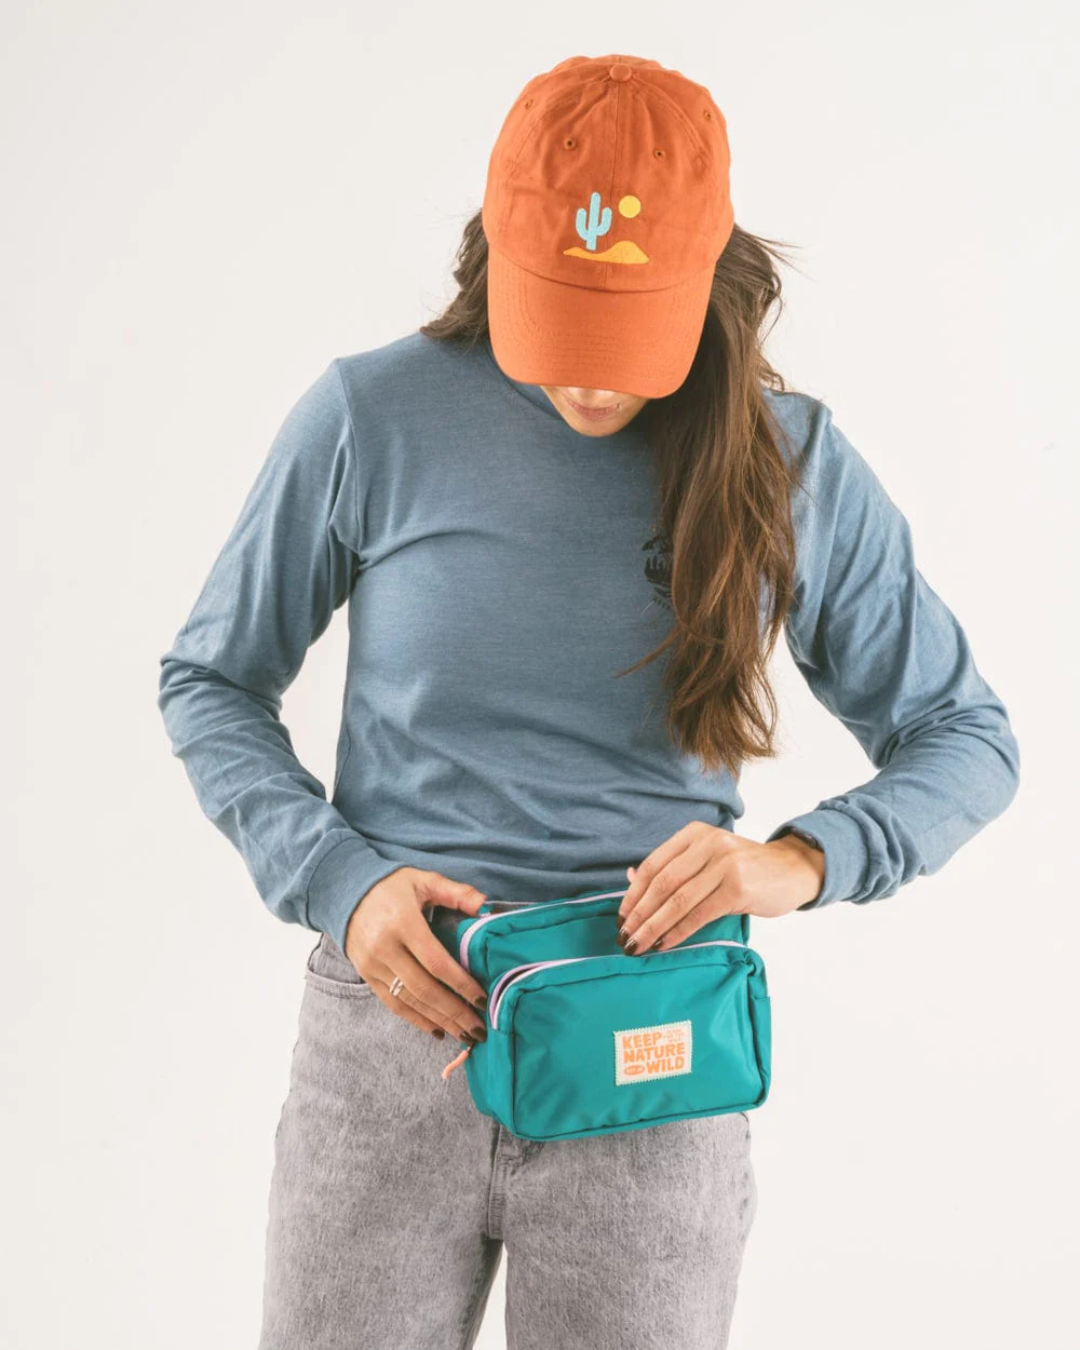 Teal/Lavender Adventure Fanny Pack - Keep Nature Wild